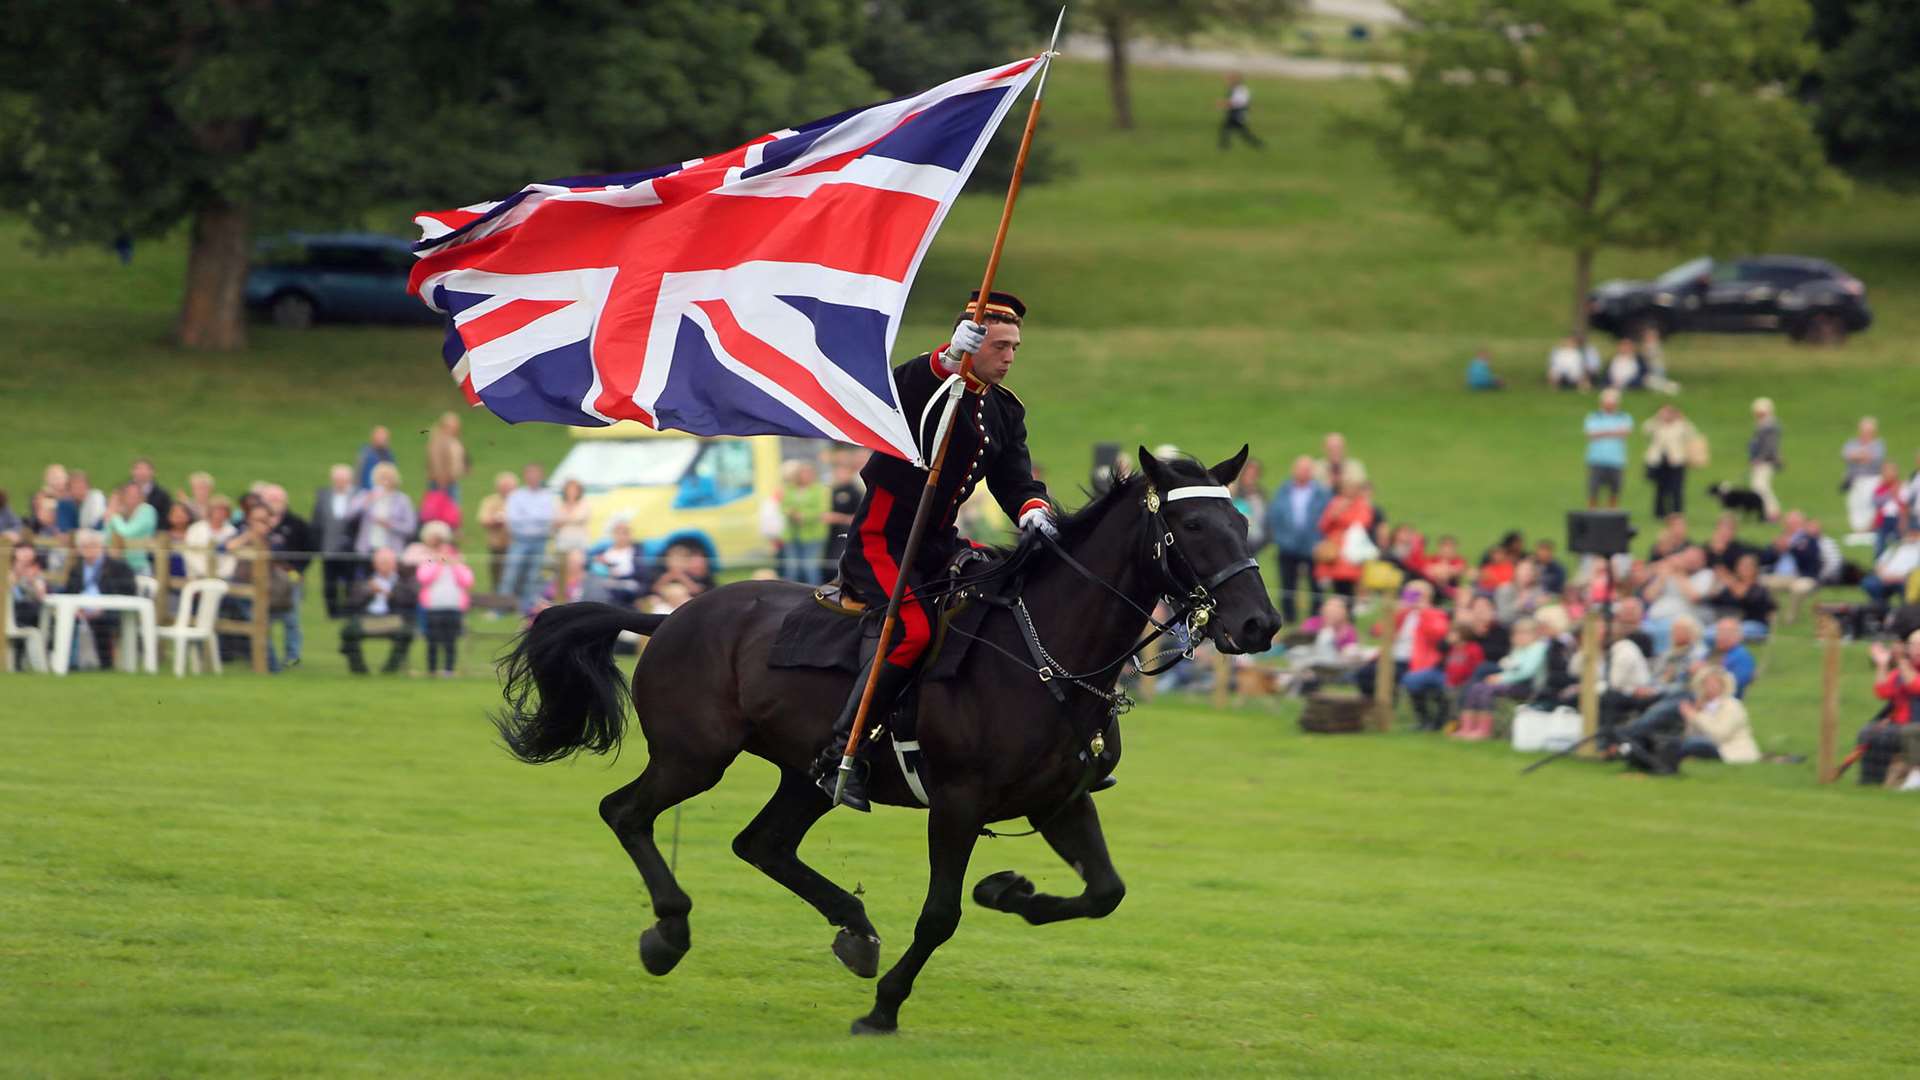 There will be a mounted display at the Kent County Show 2018